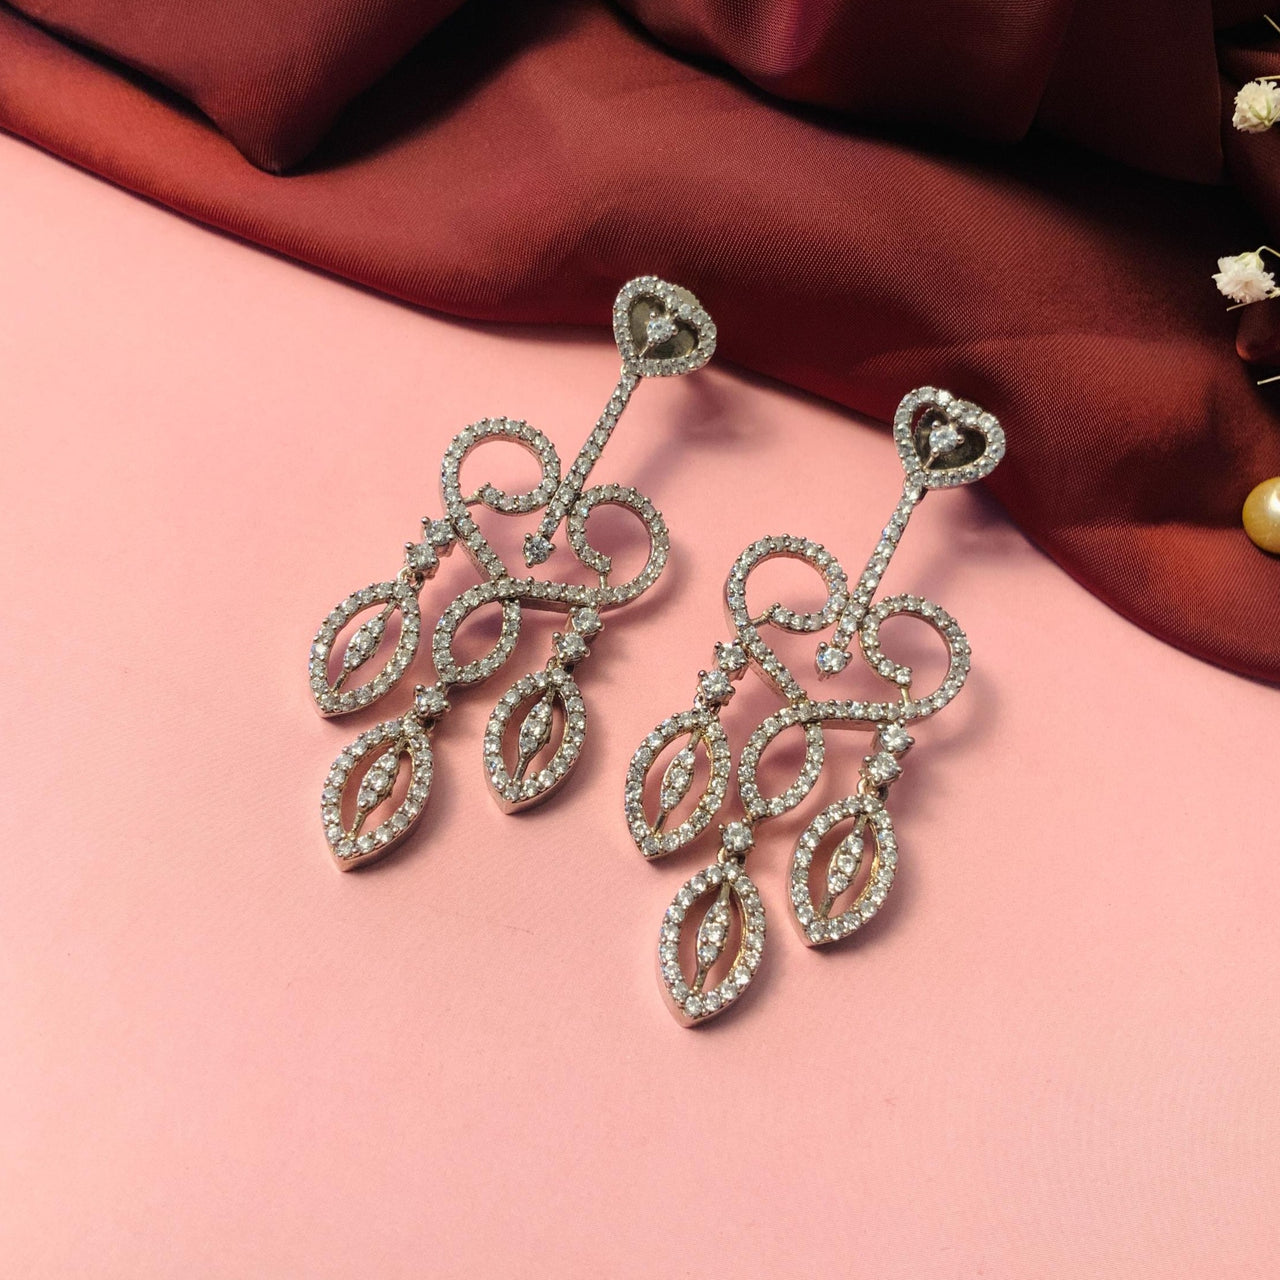 Lovely Victorian Silver Plated Long Earrings